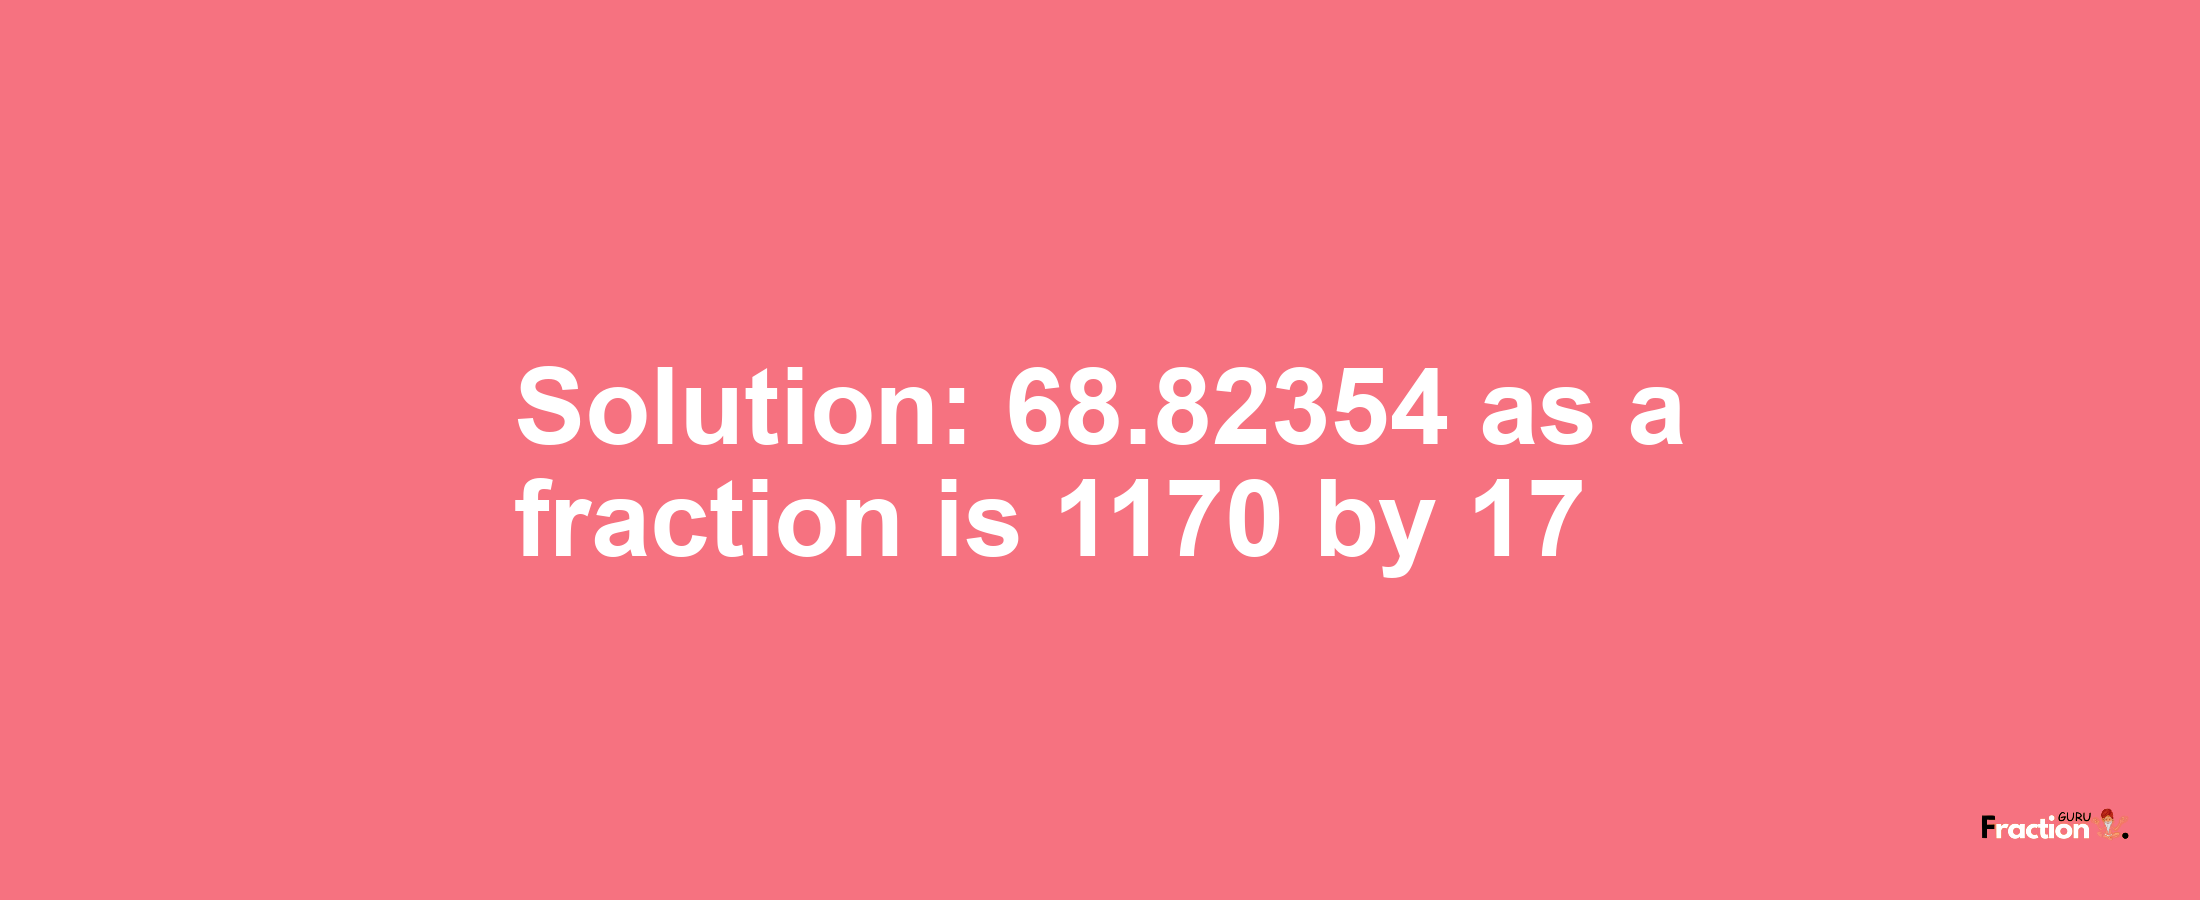 Solution:68.82354 as a fraction is 1170/17